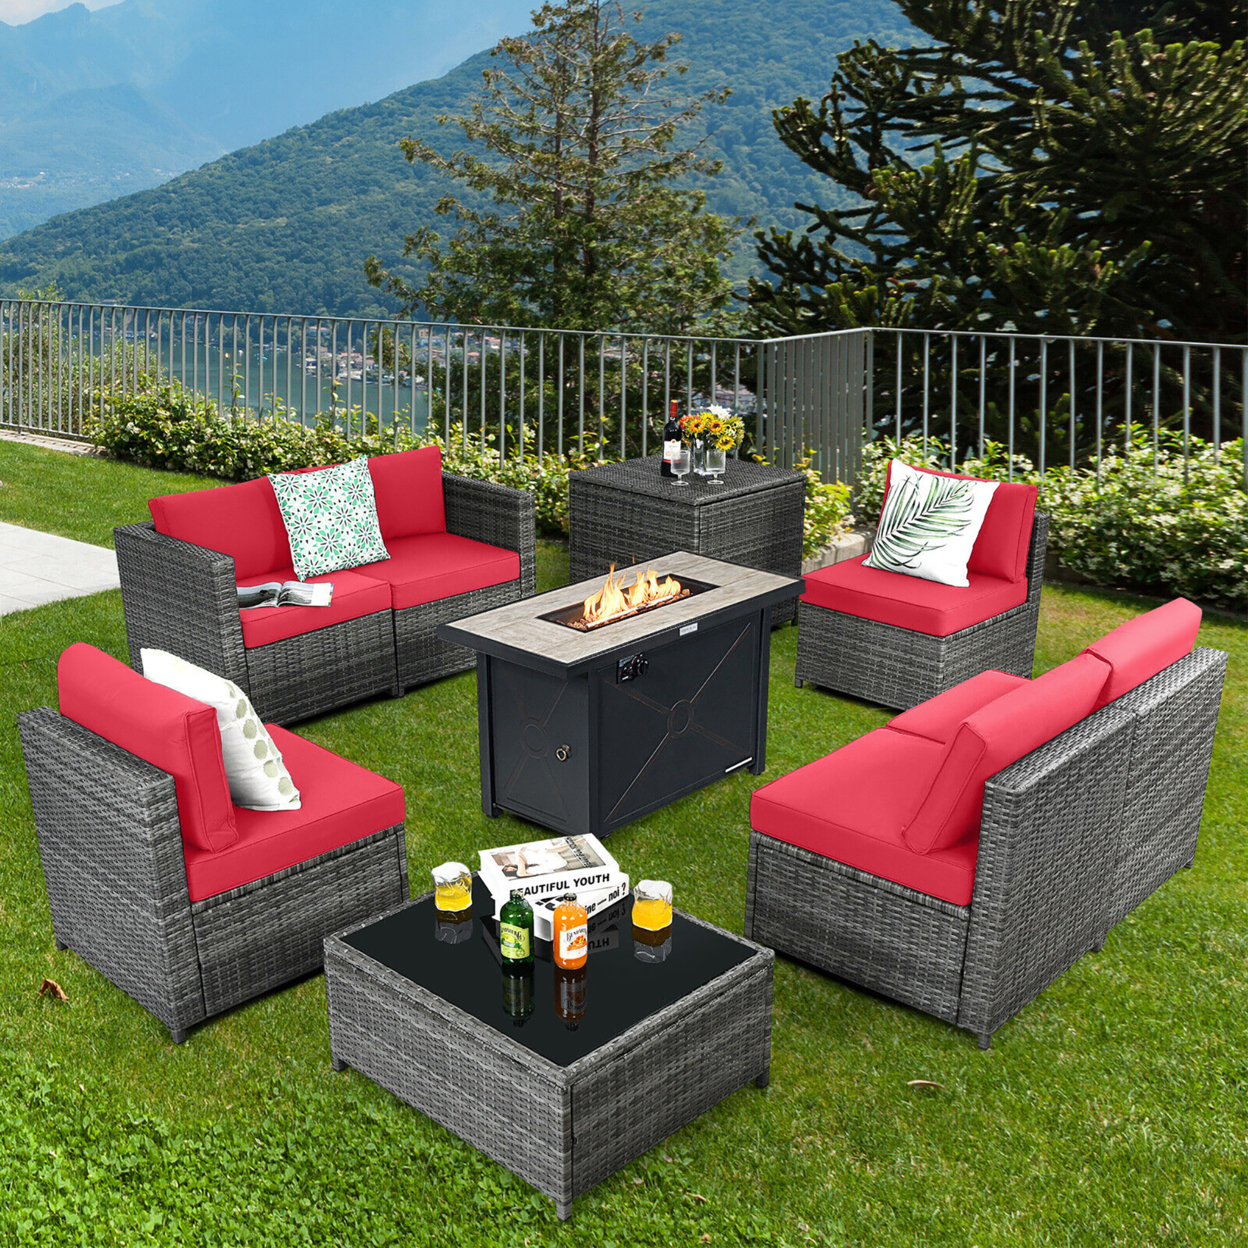 9 PCS Patio Rattan Furniture Set Fire Pit Table Storage Black W/ Cover - Red